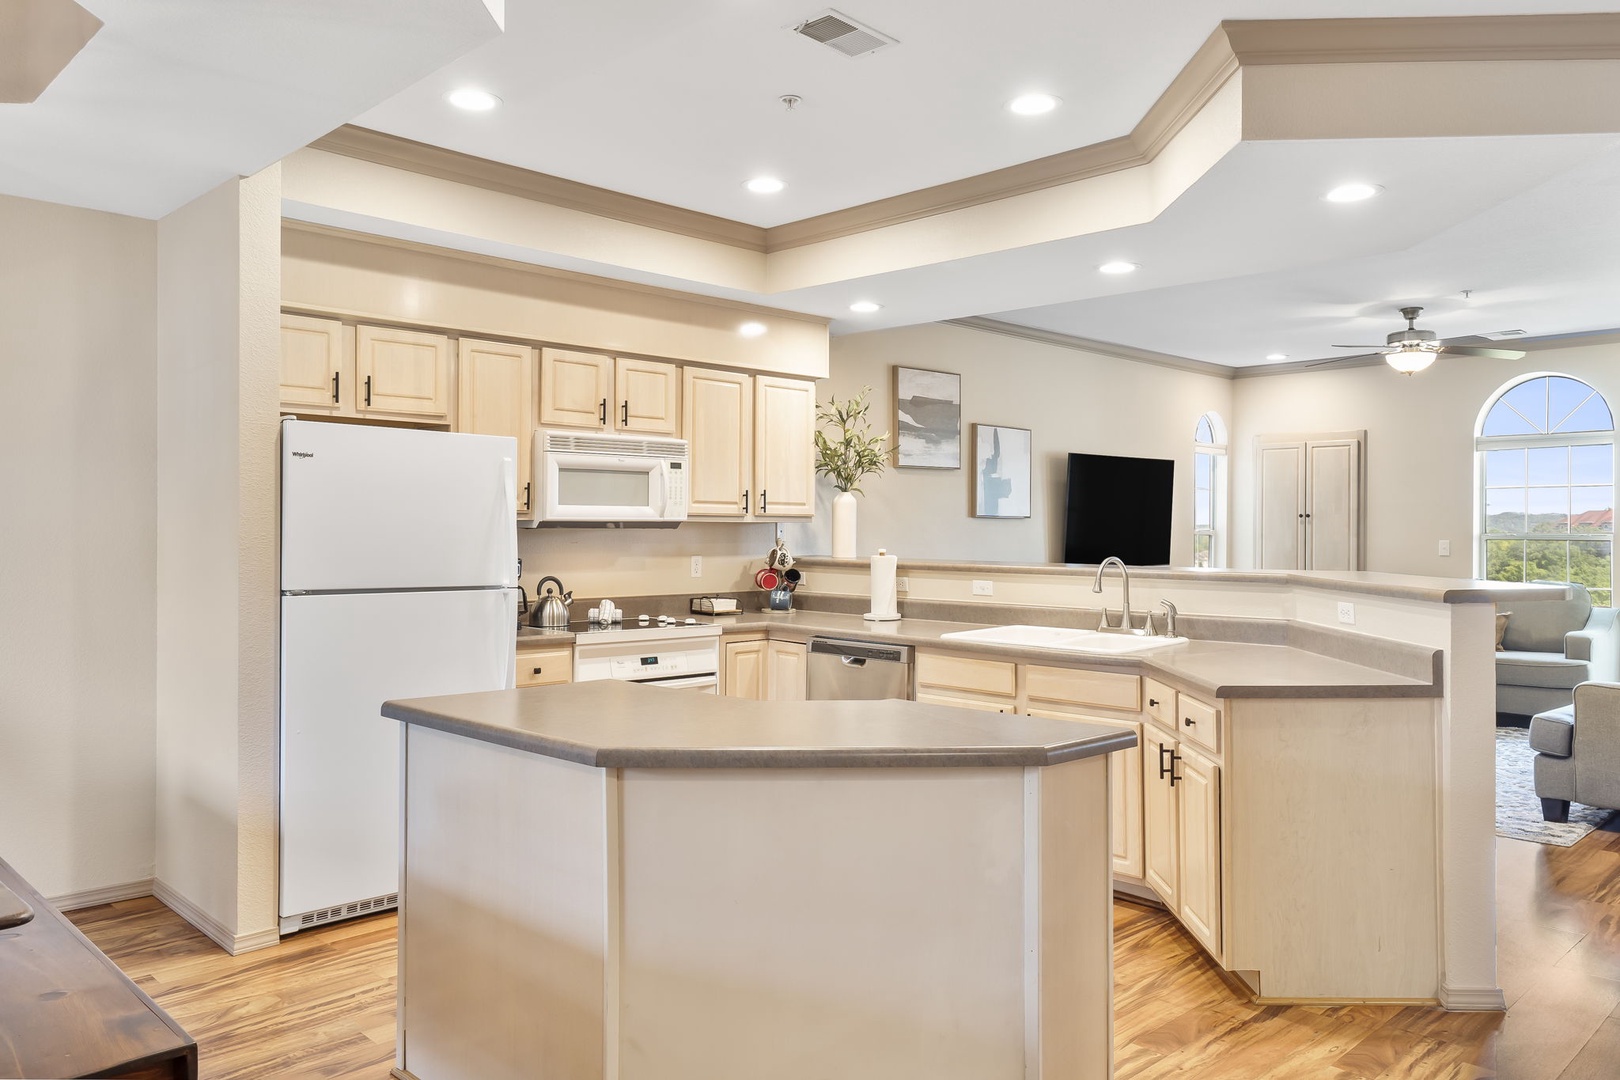 The open kitchen offers ample space & is well-equipped for your visit